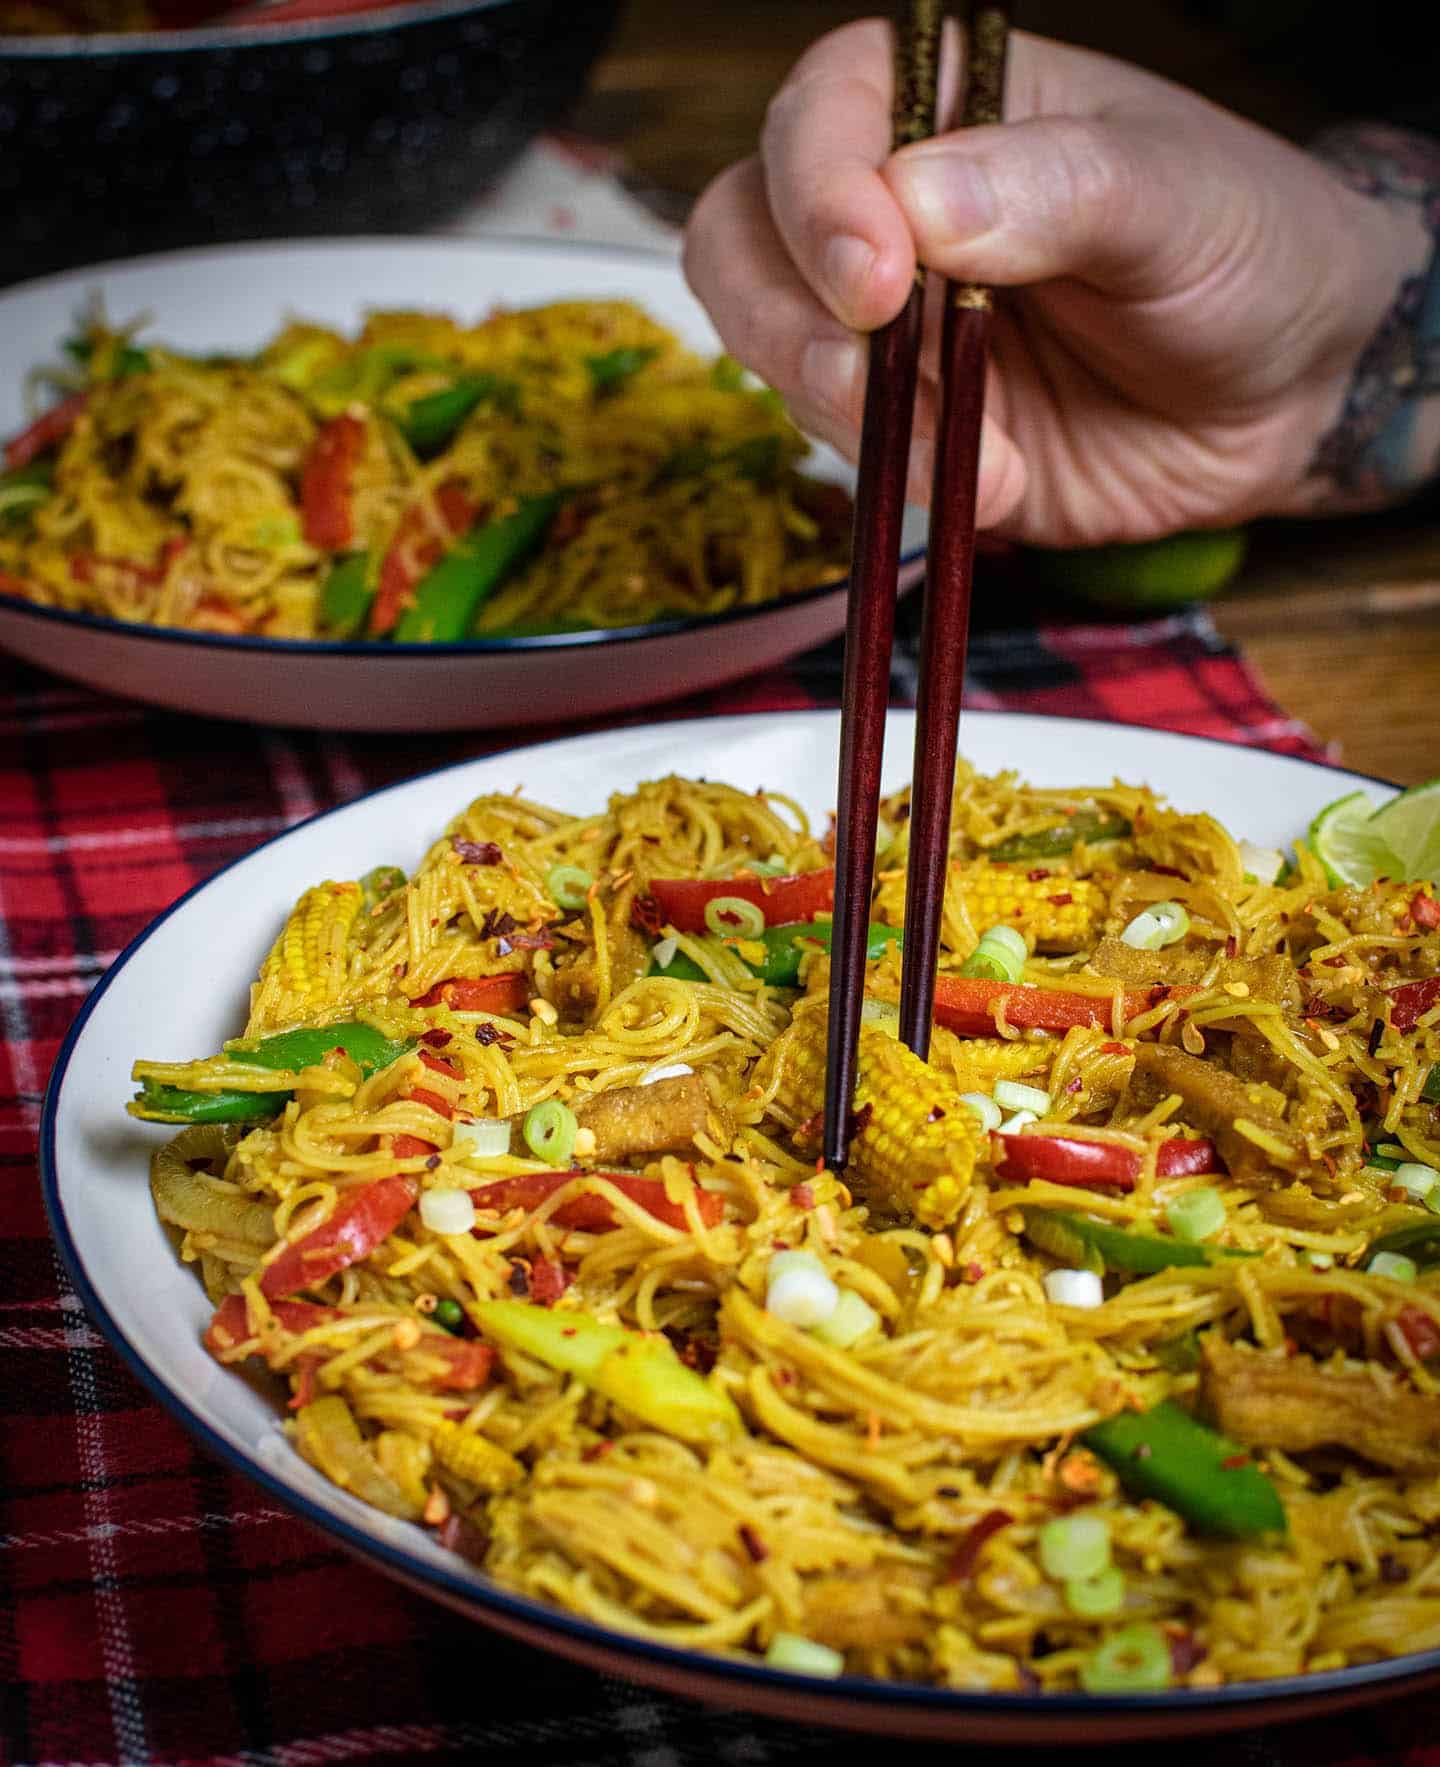 Veg Singapore noodles on a white plate with a pair of hands holding chopsticks, about to pick up some baby corn to eat,